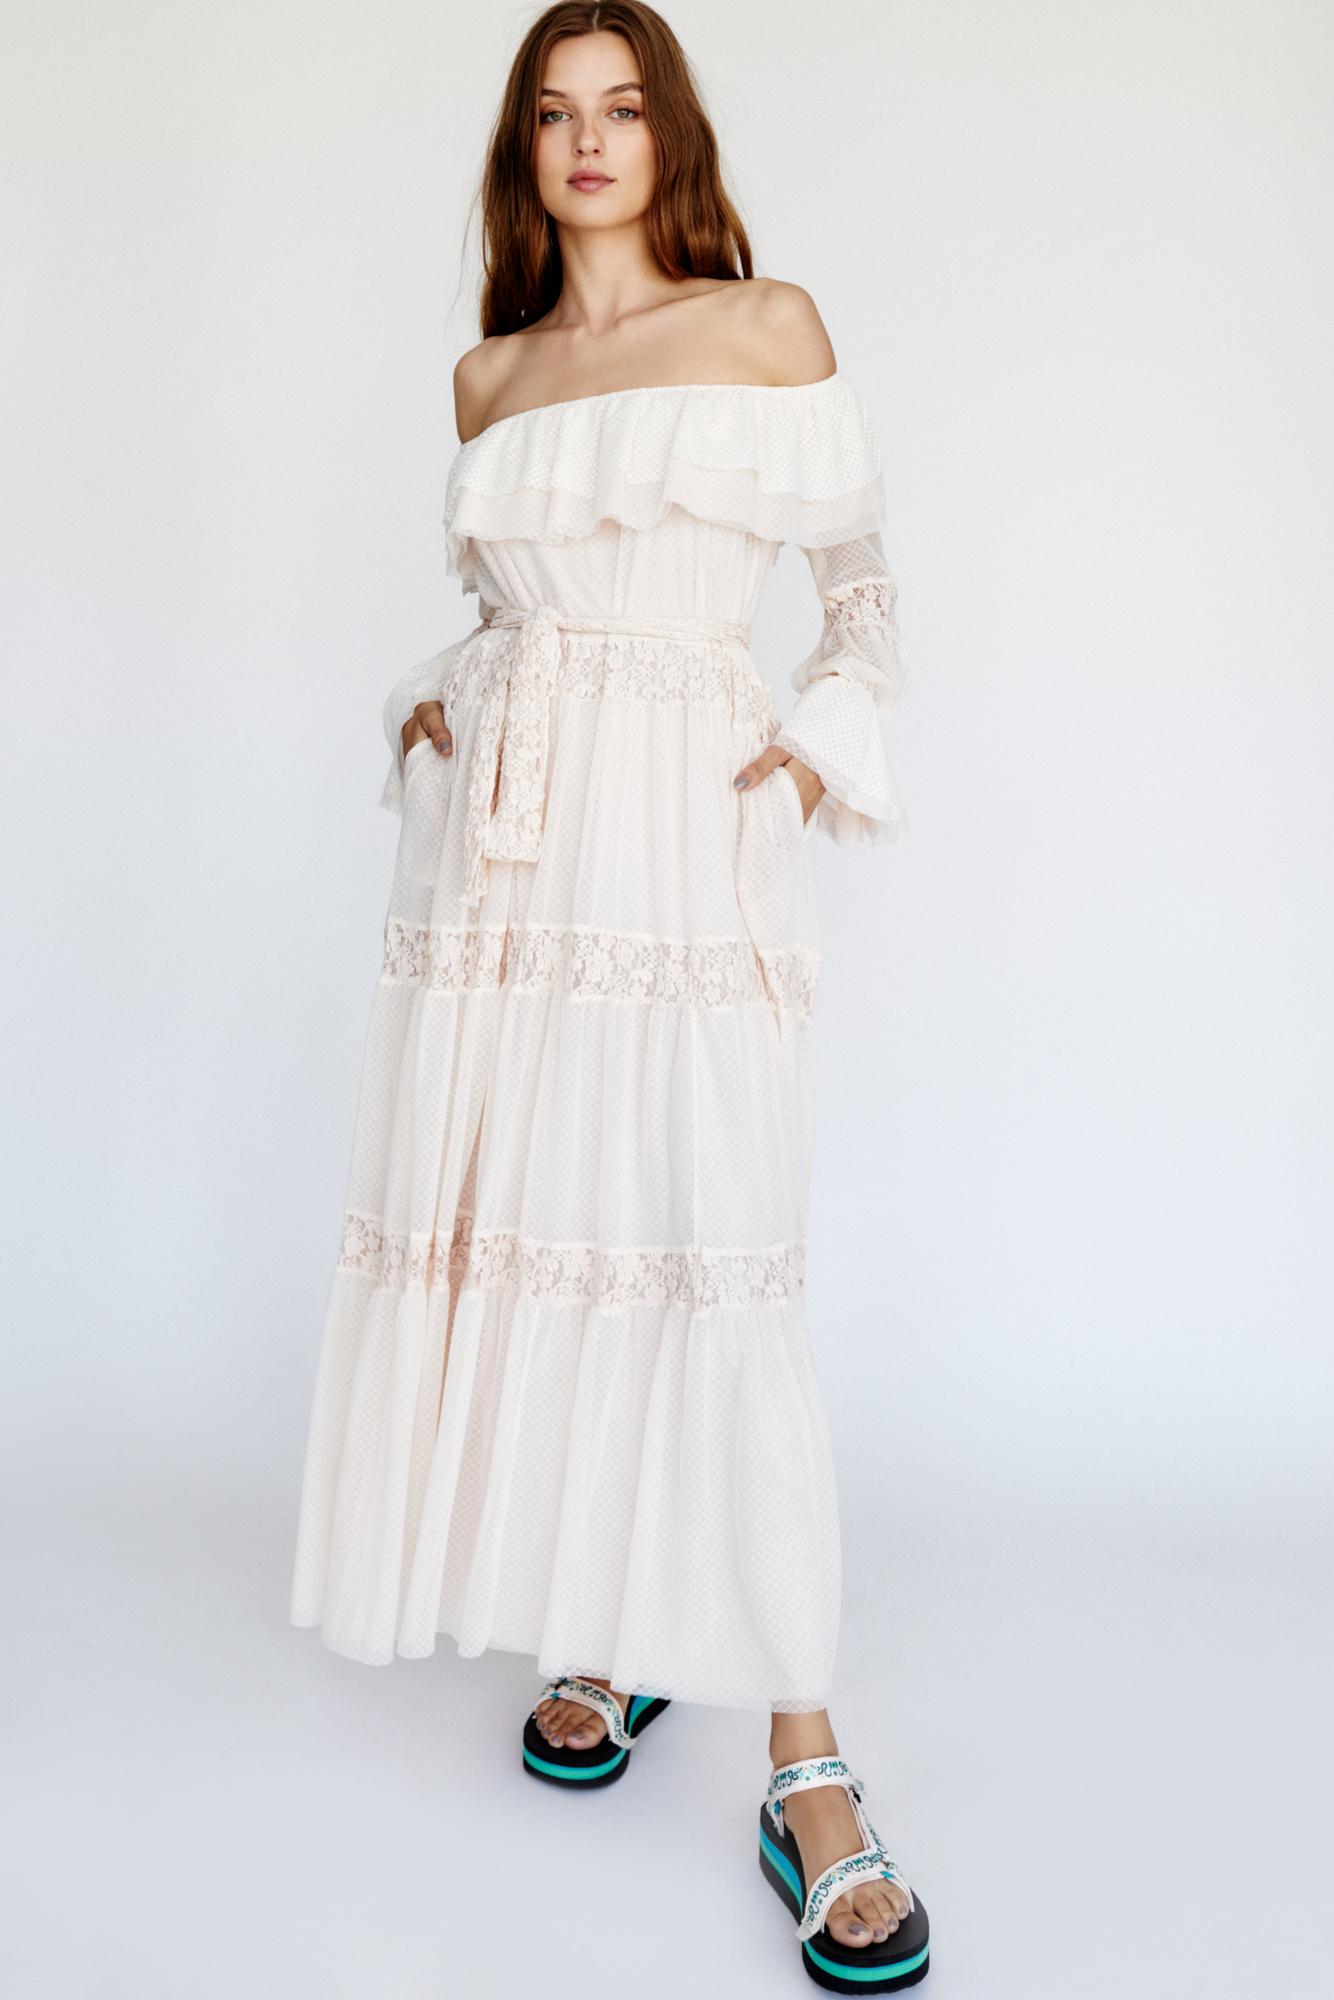 Free People Lace Dylan's Debut Dress in 